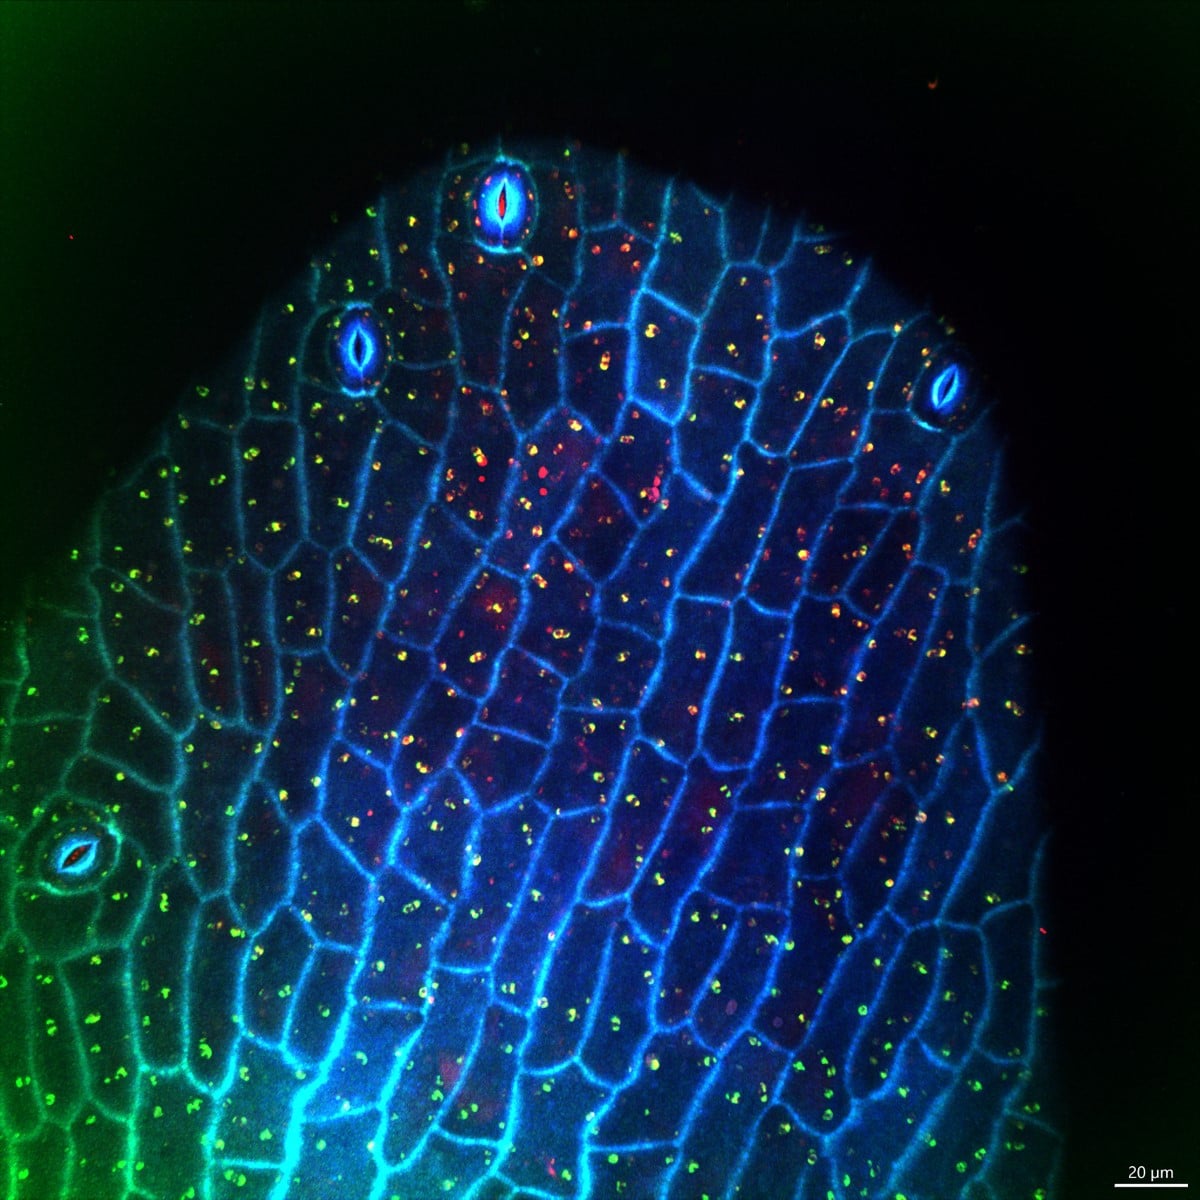 Autofluorescence of the tip of the stamens of flowers